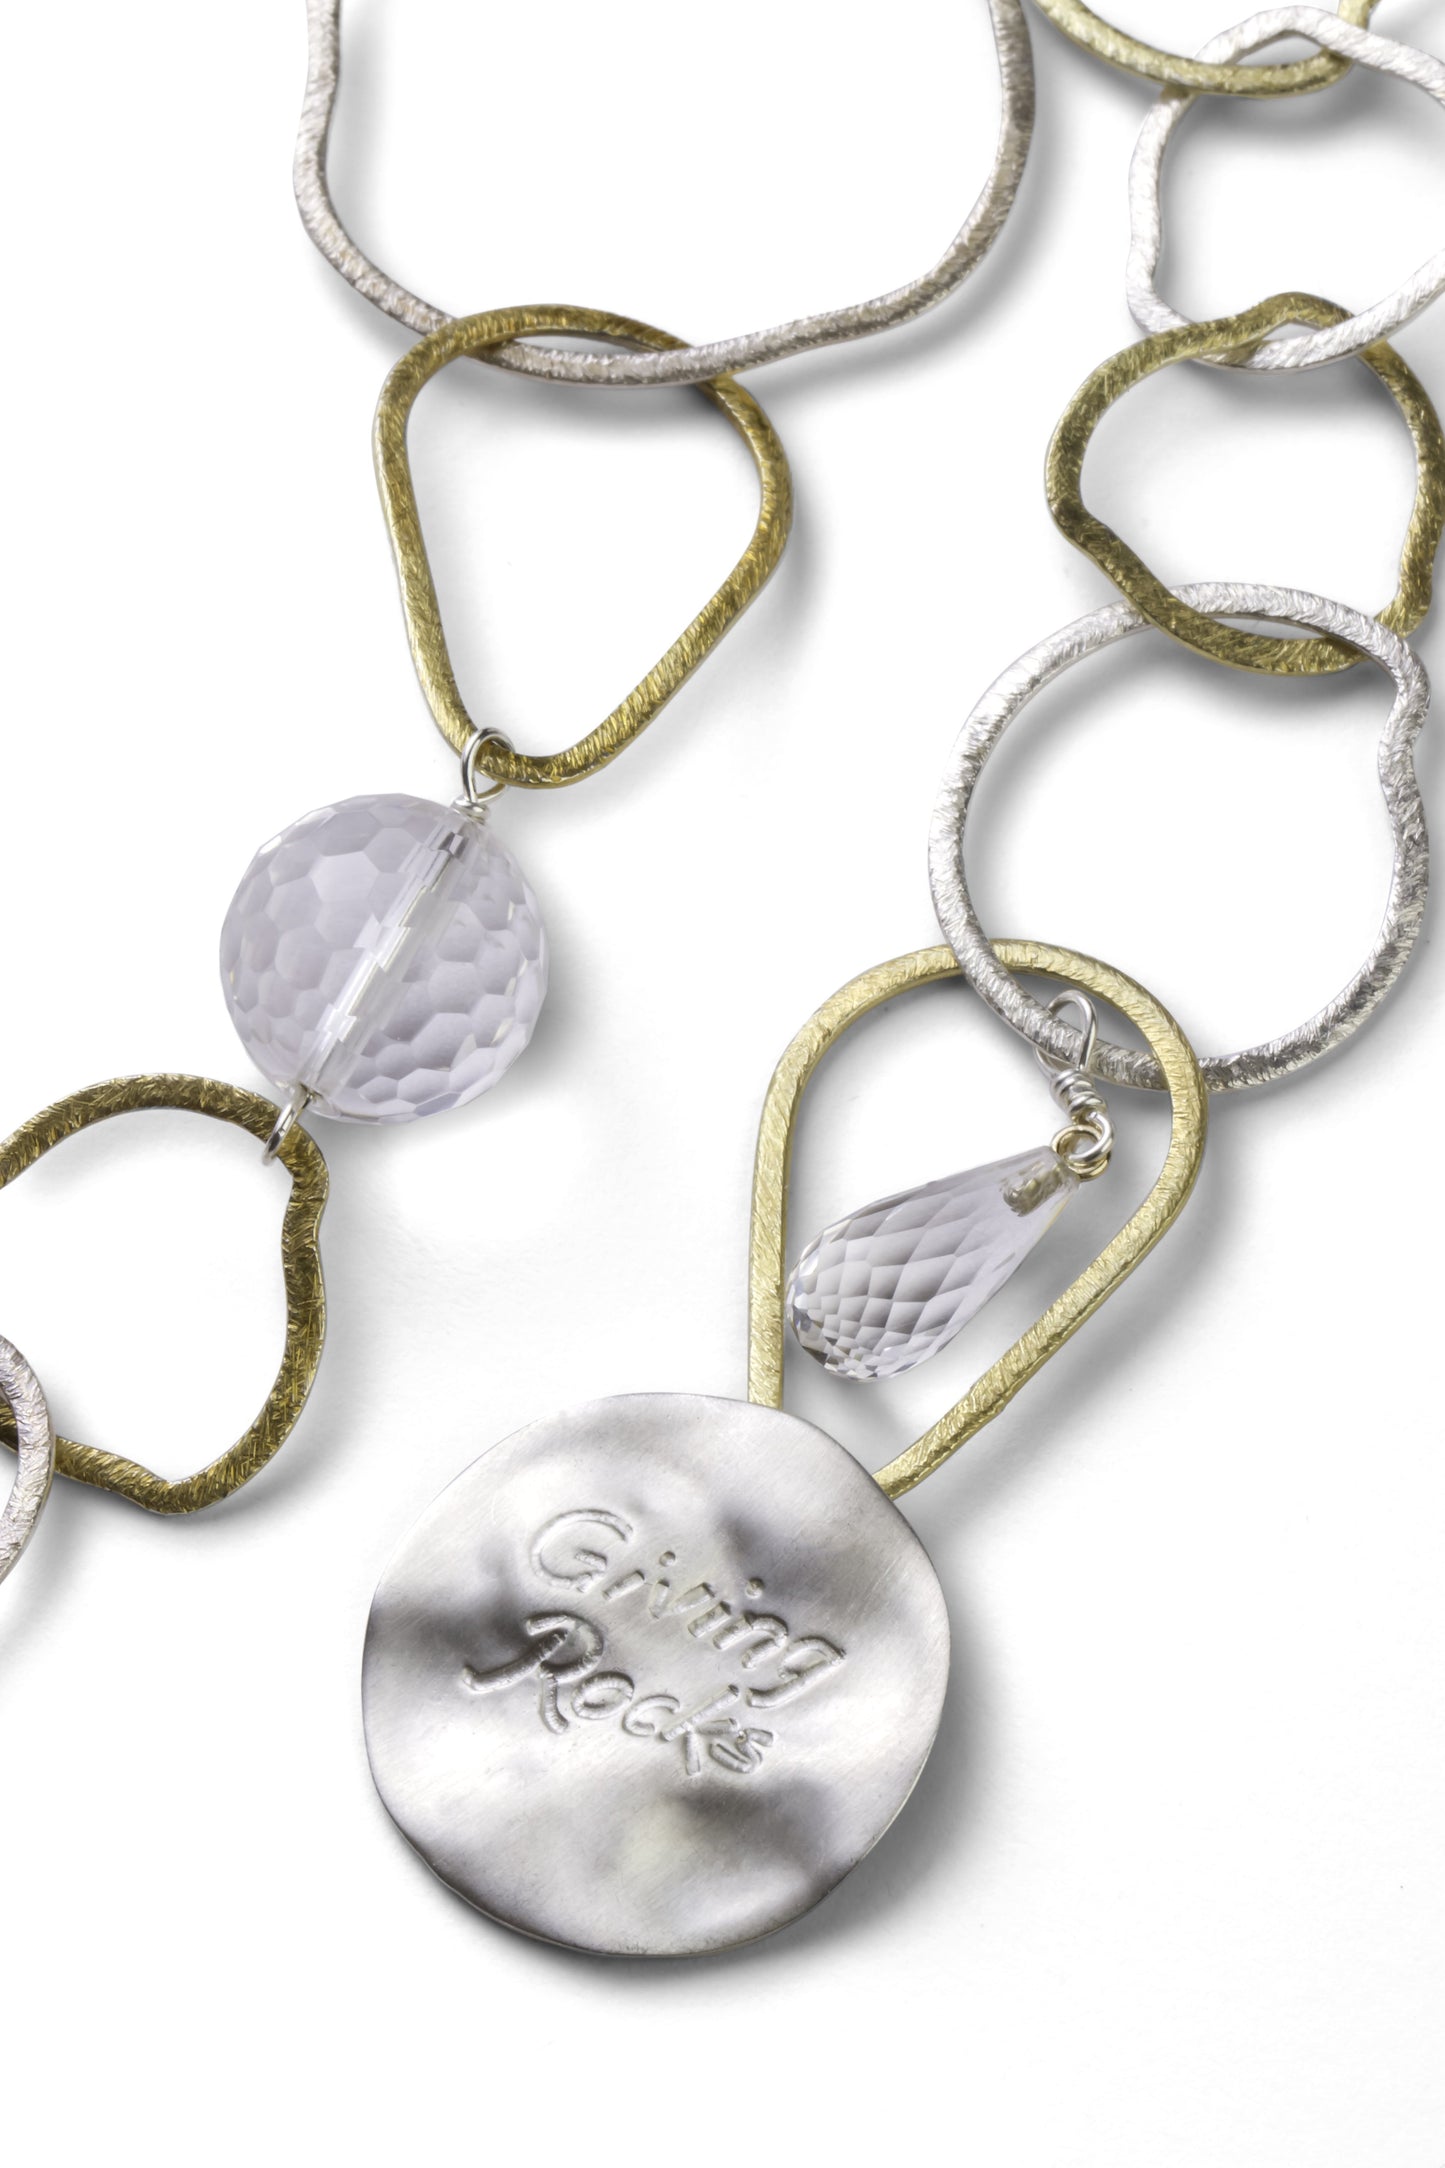 Philanthropy is Beautiful® and Pavé The Way® Jewelry - About The Giving - Giving Rocks Necklace